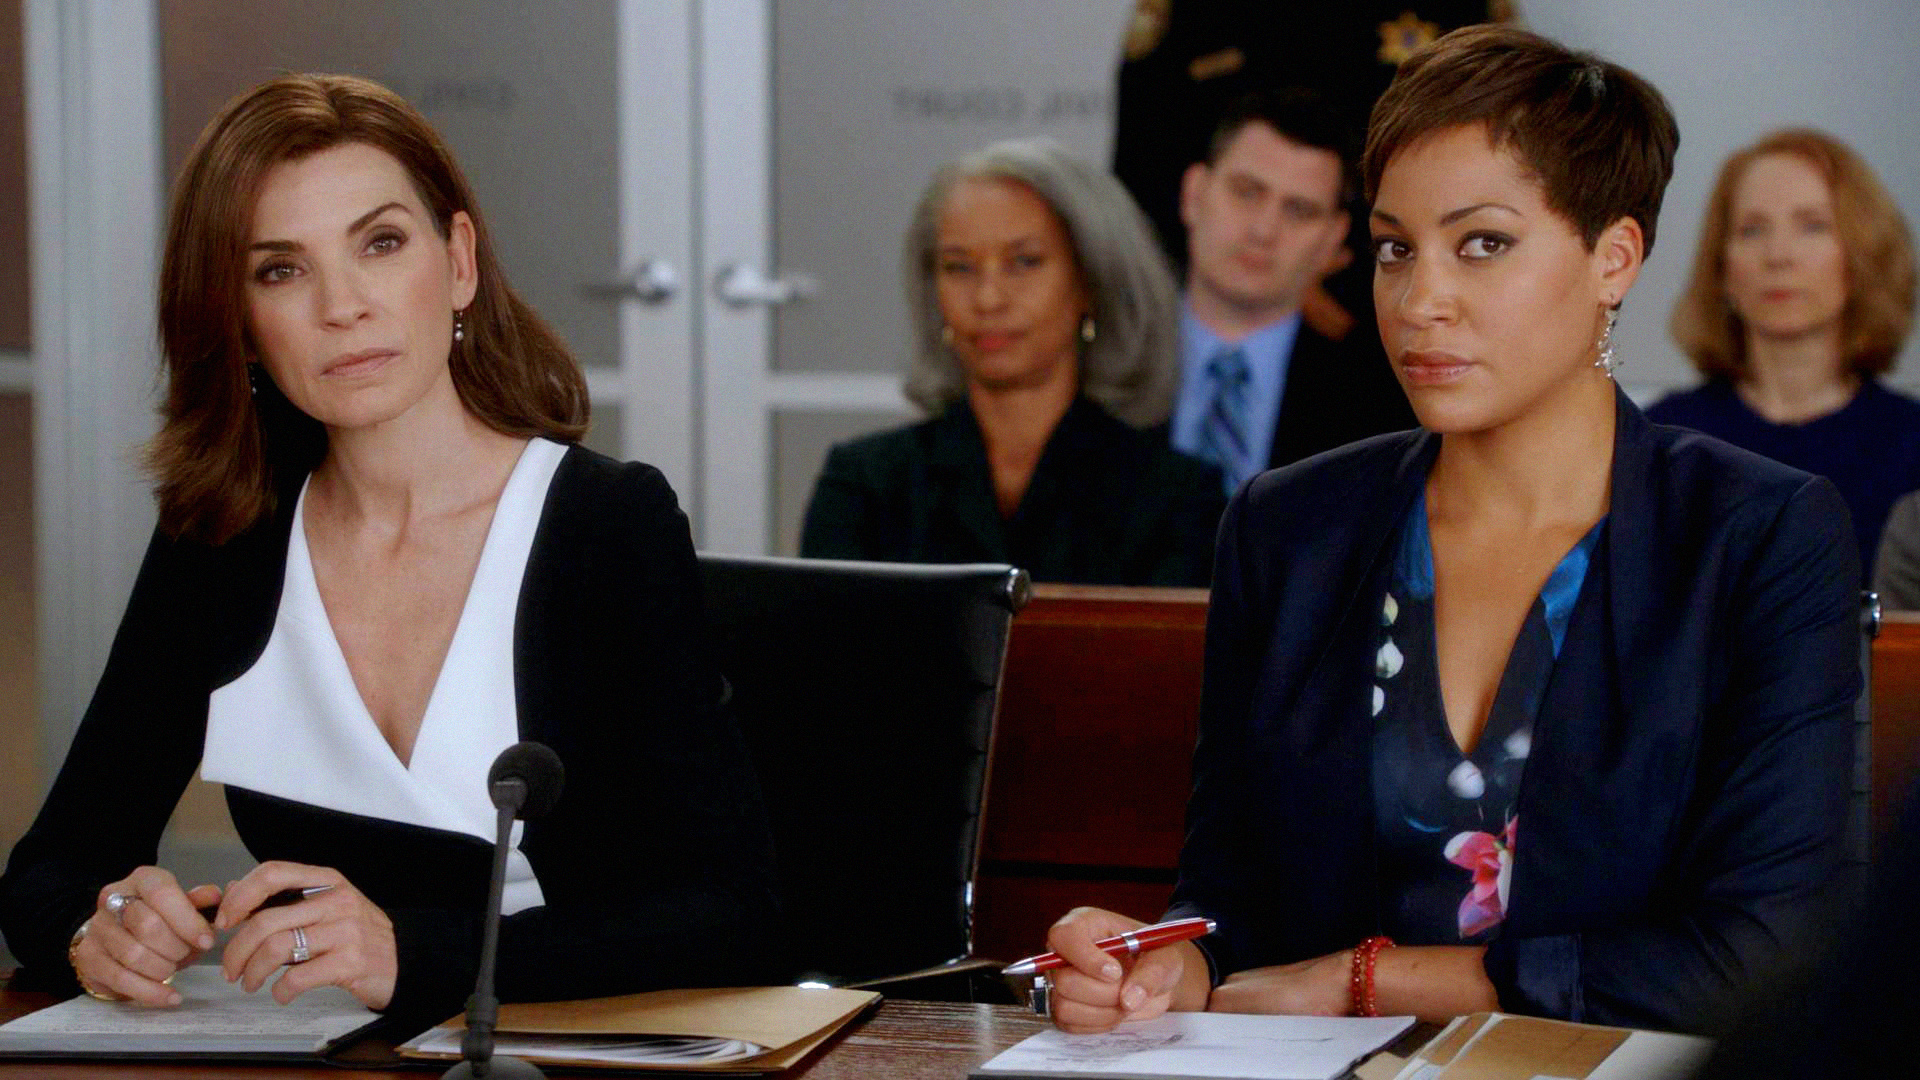 The Good Wife (TV Series): Cush Jumbo, A British actress and writer, Attorney Lucca Quinn, CBS. 1920x1080 Full HD Wallpaper.